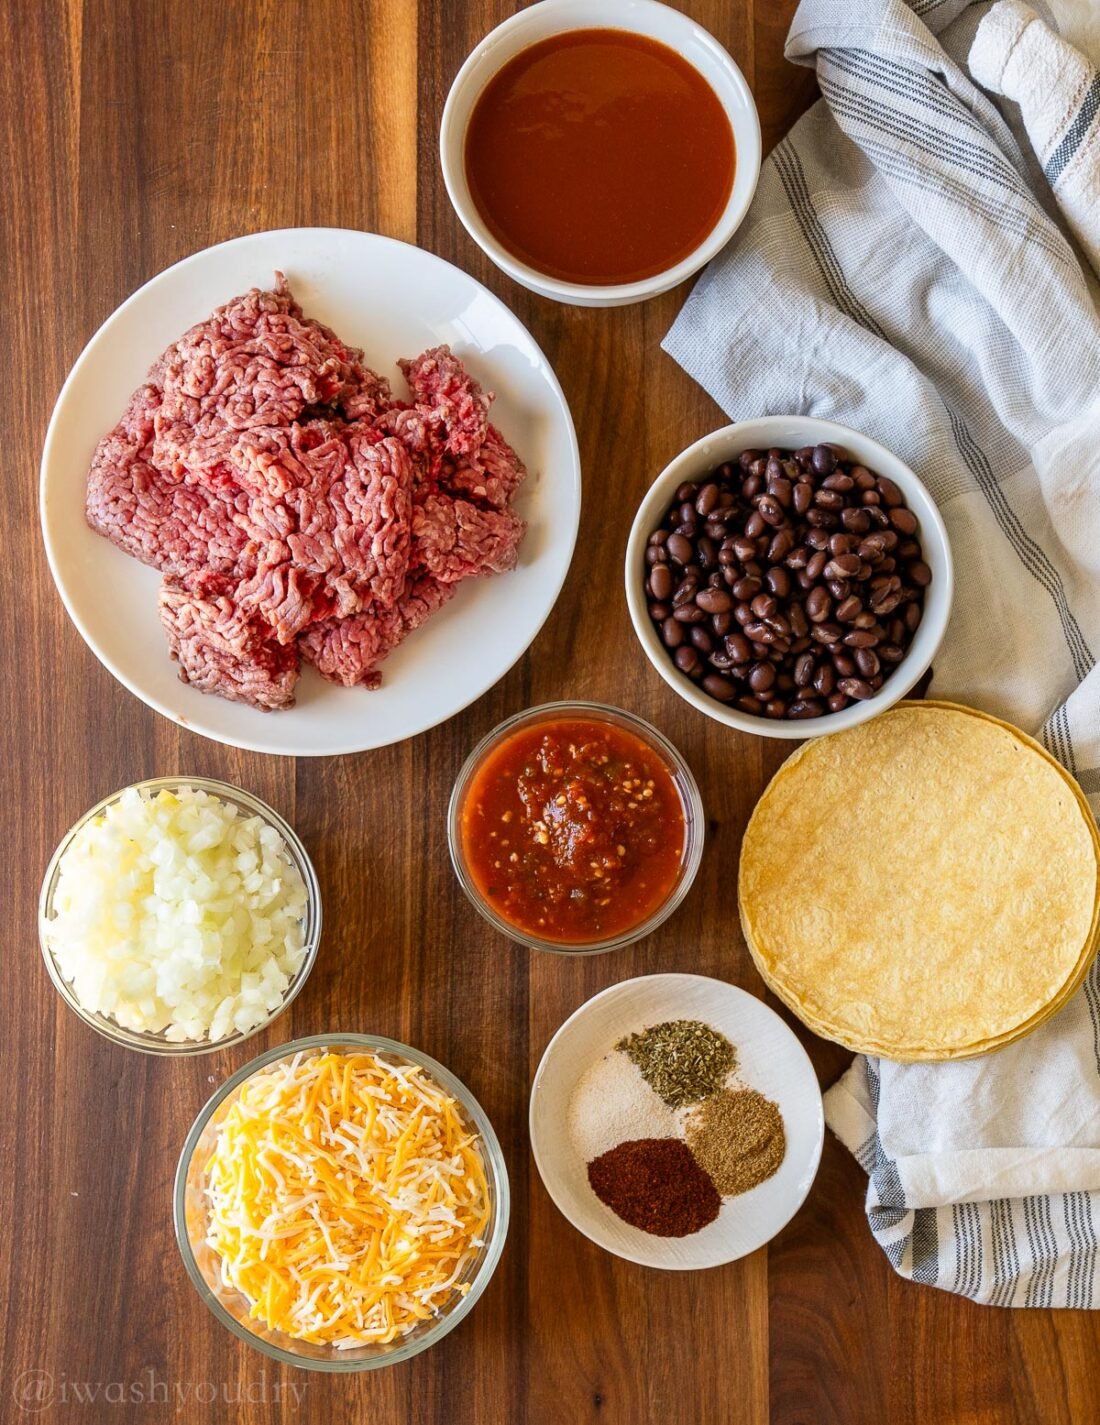 ingredients with ground beef on wooden surface.